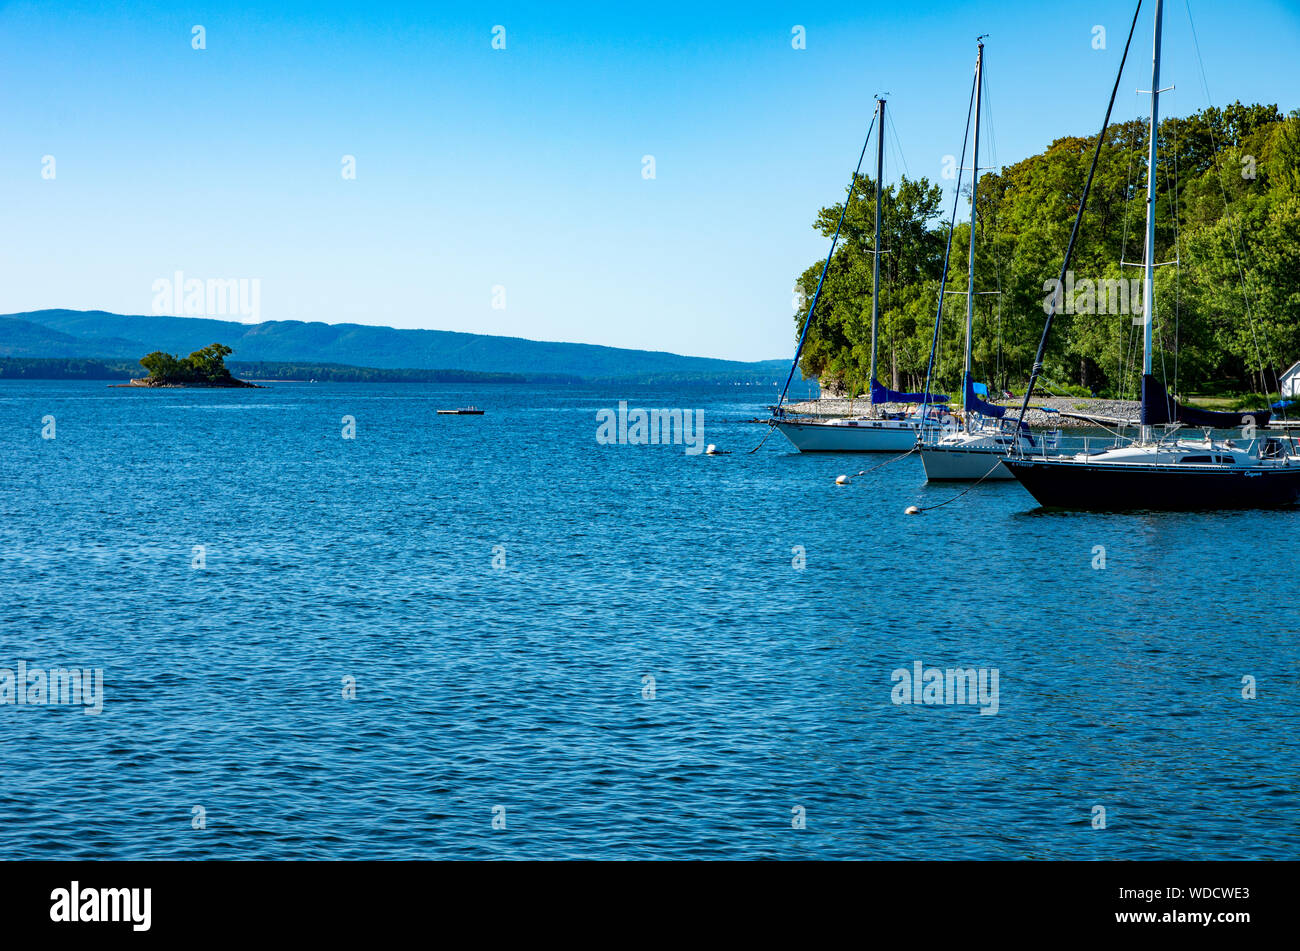 sailboats moored in a sheltered bay Stock Photo